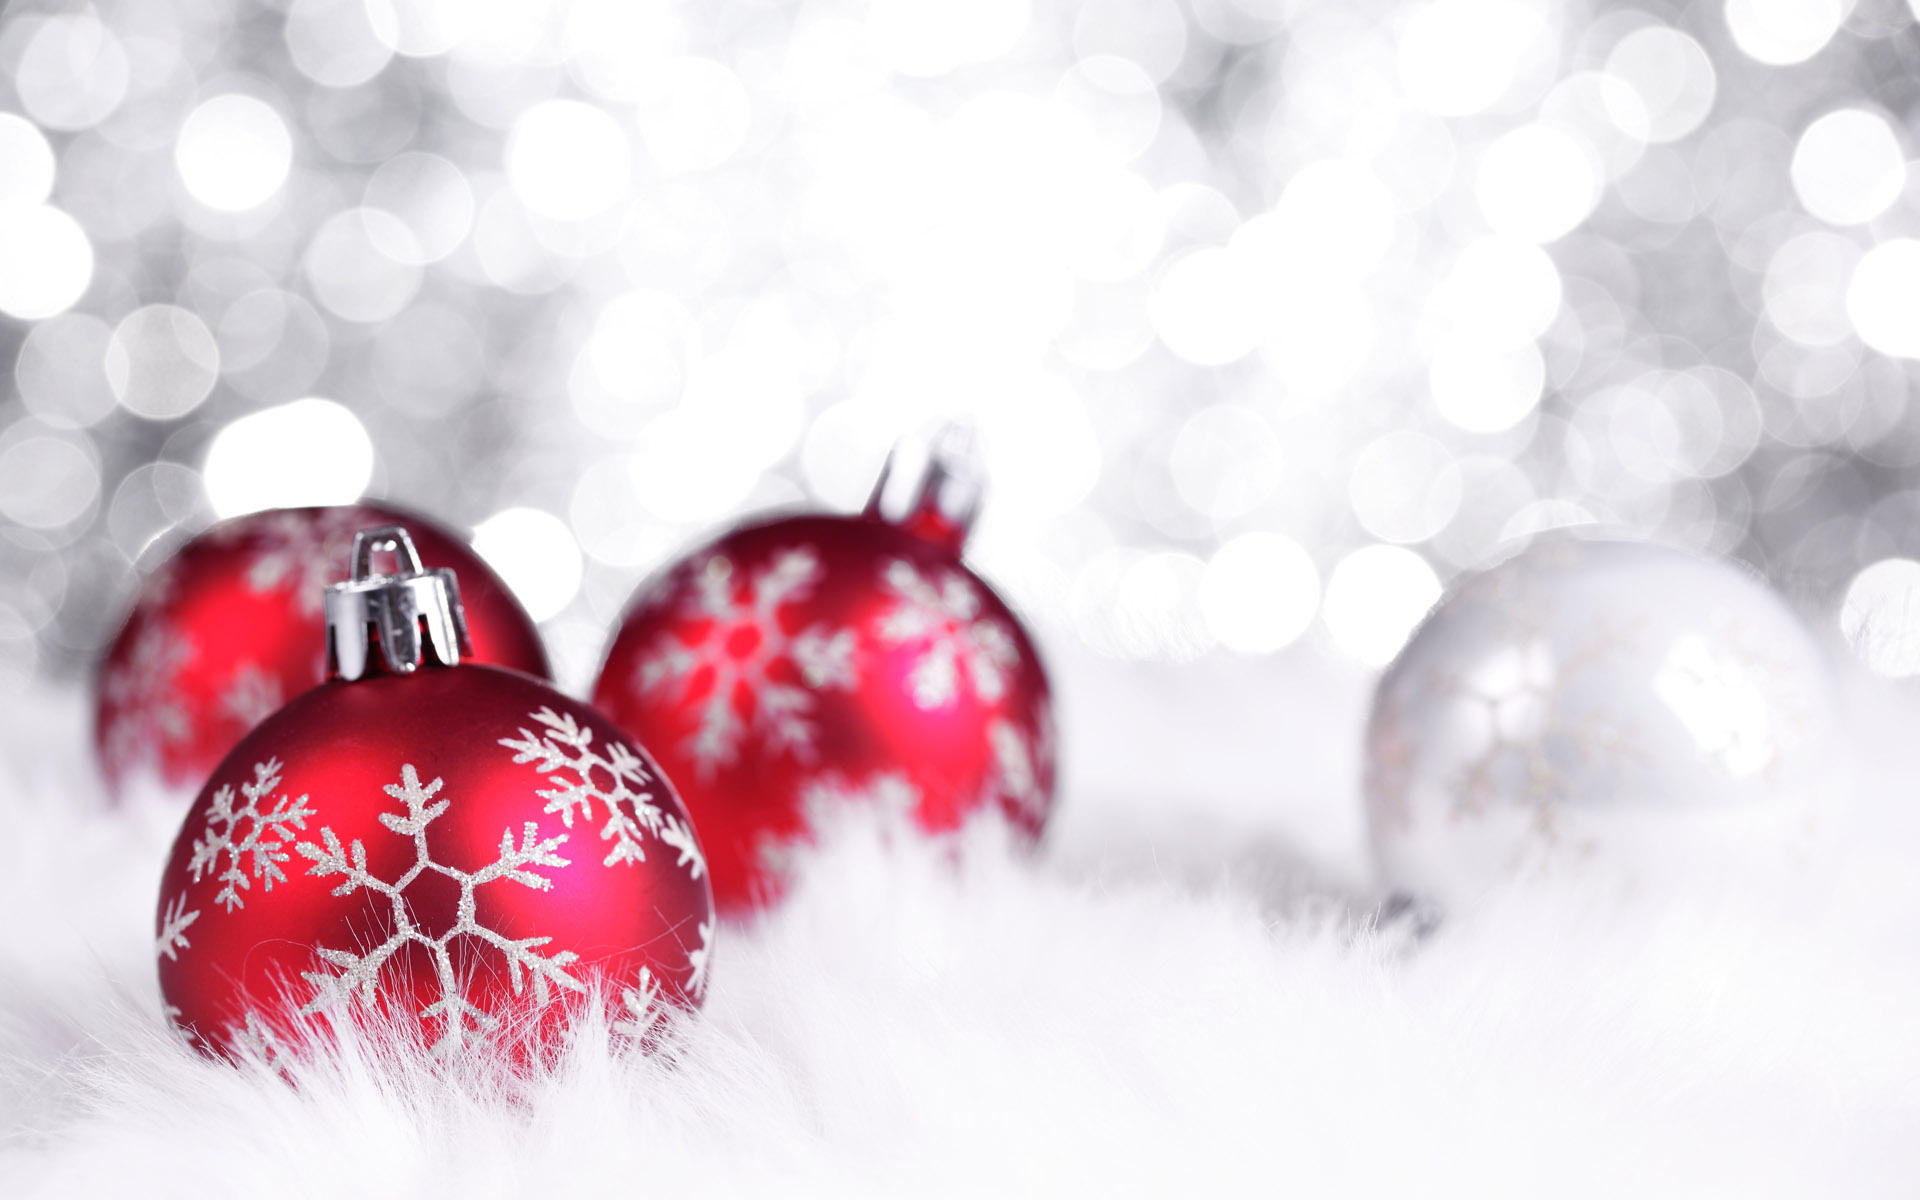 Christmas Backgrounds Free Download | Wallpapers, Backgrounds ...